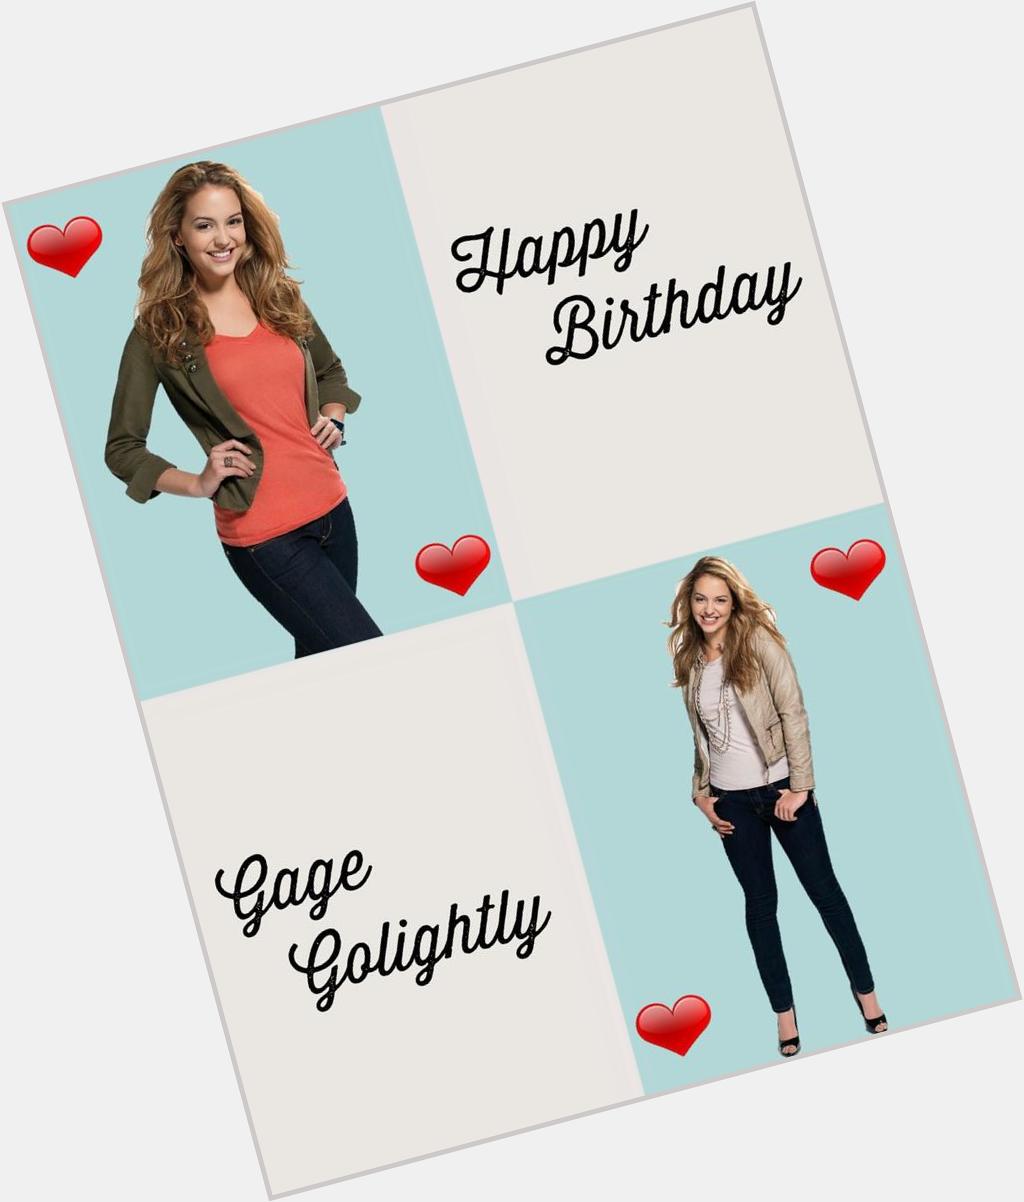 Even though Gage Golightly doesn\t have a message I just want to wish her a happy birthday! So happy birthday Gage 